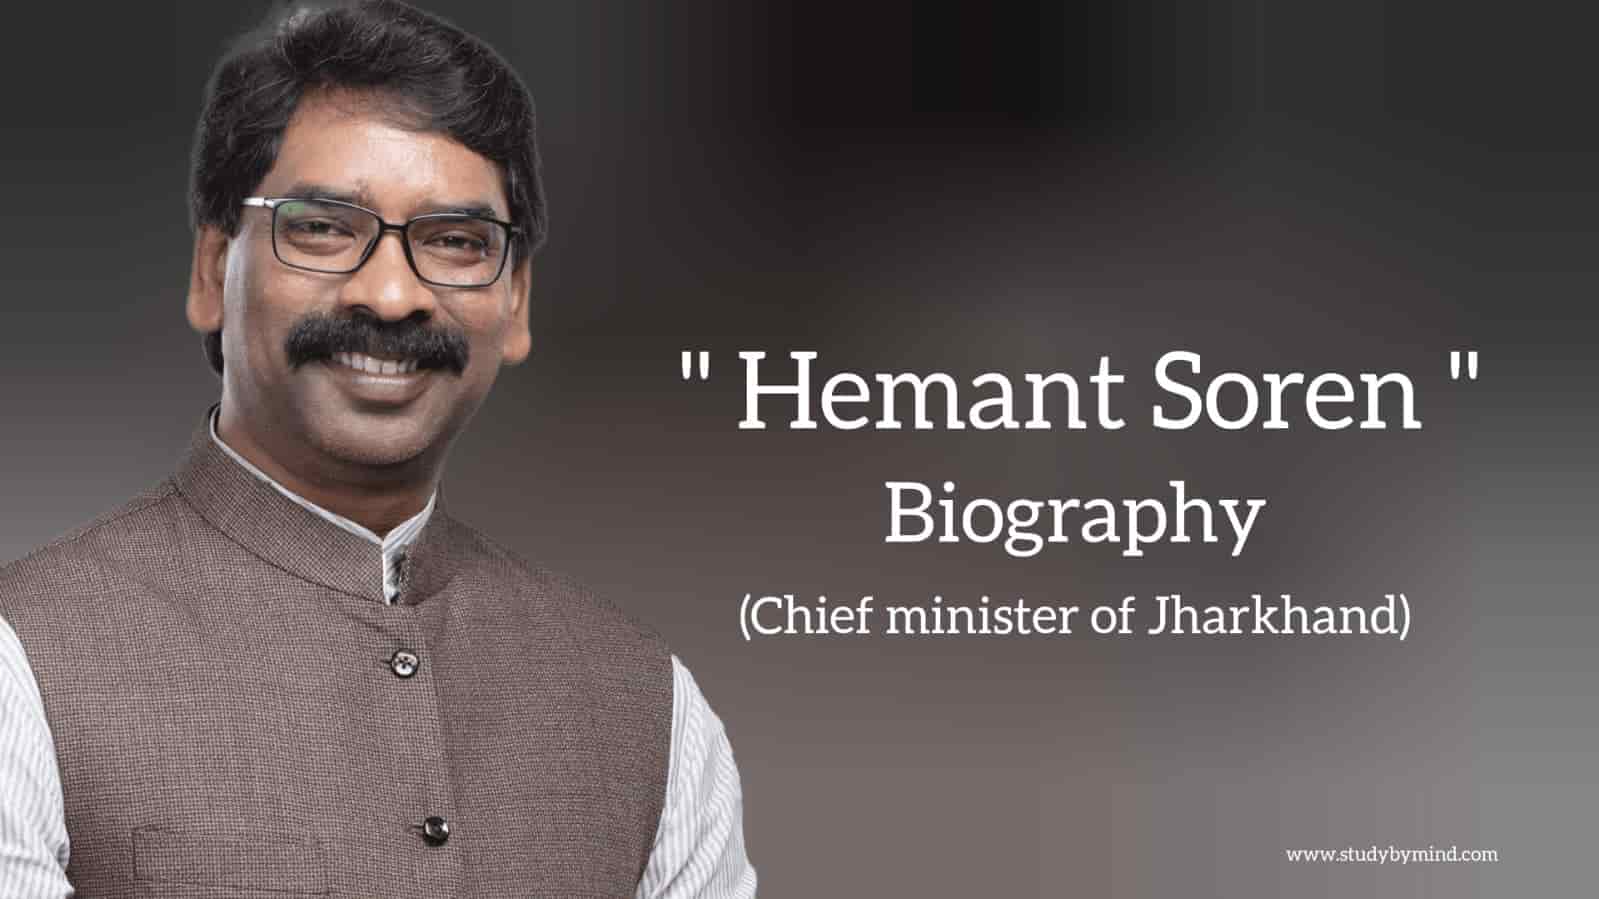 You are currently viewing Hemant soren biography in english (Chief Minister of Jharkhand)